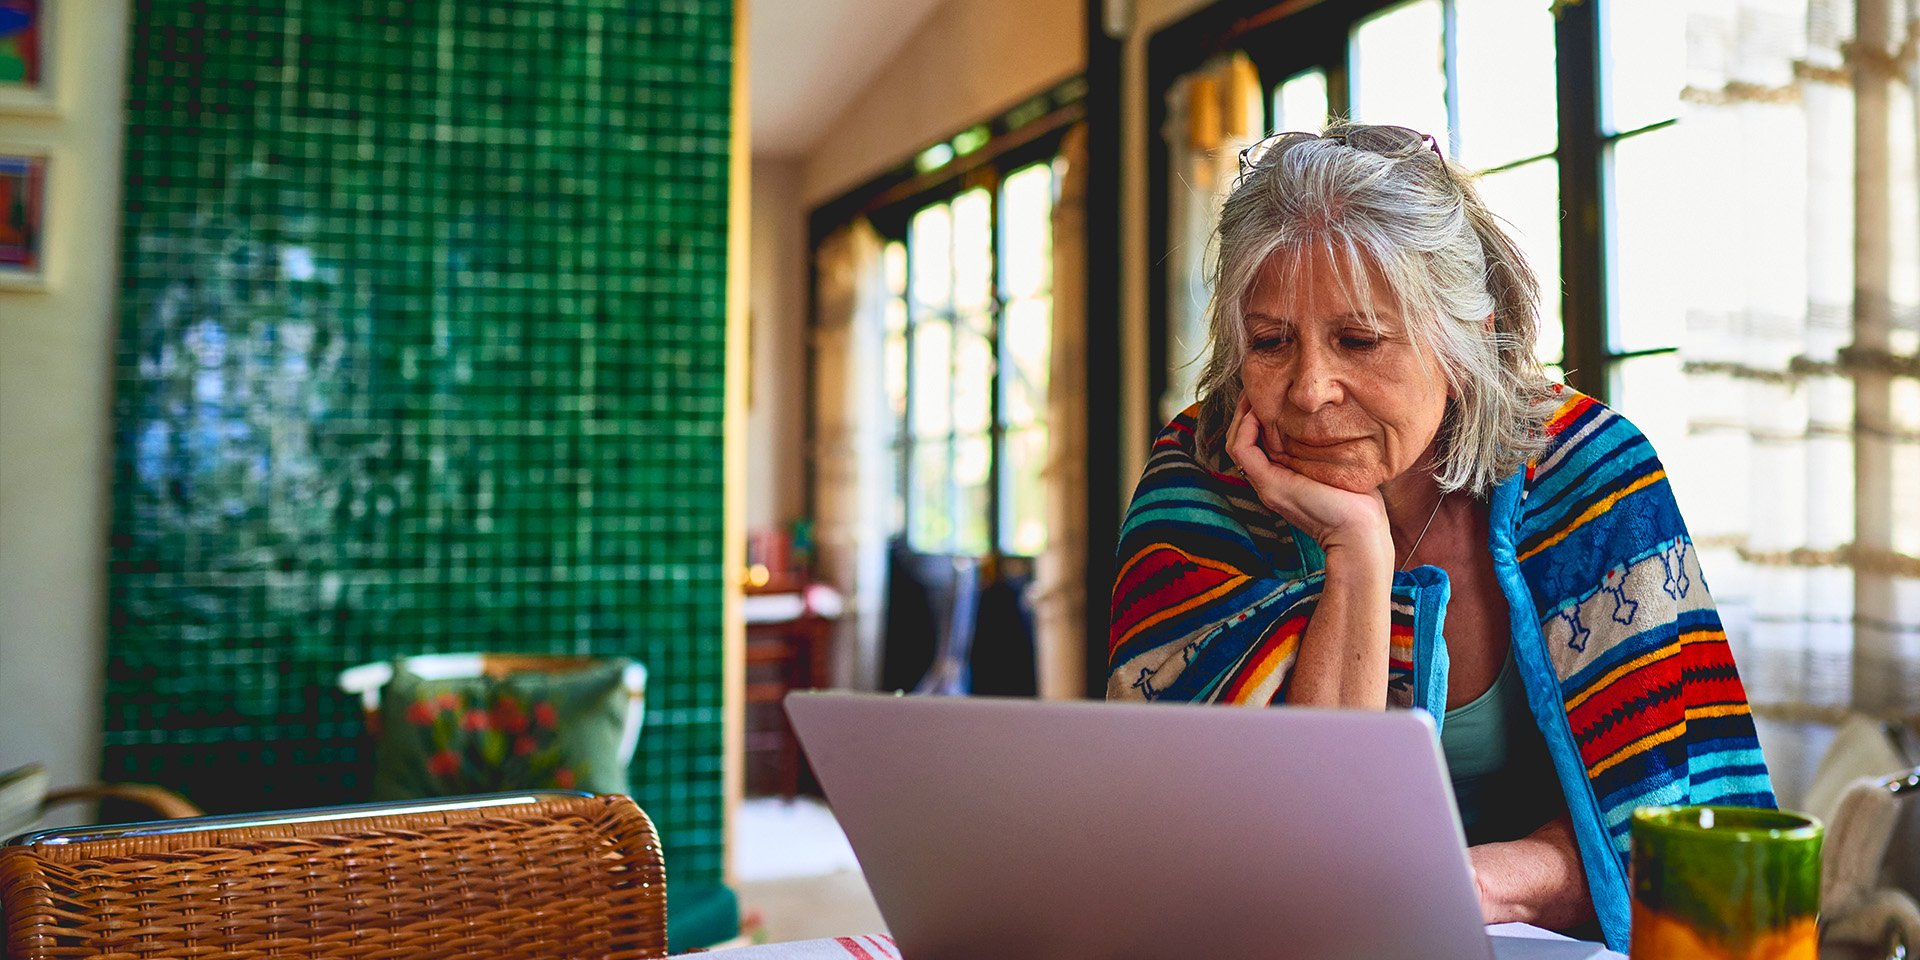 Elderly woman navigates Desert Financial's website, scrolling through the FAQ section on her laptop to find valuable information.